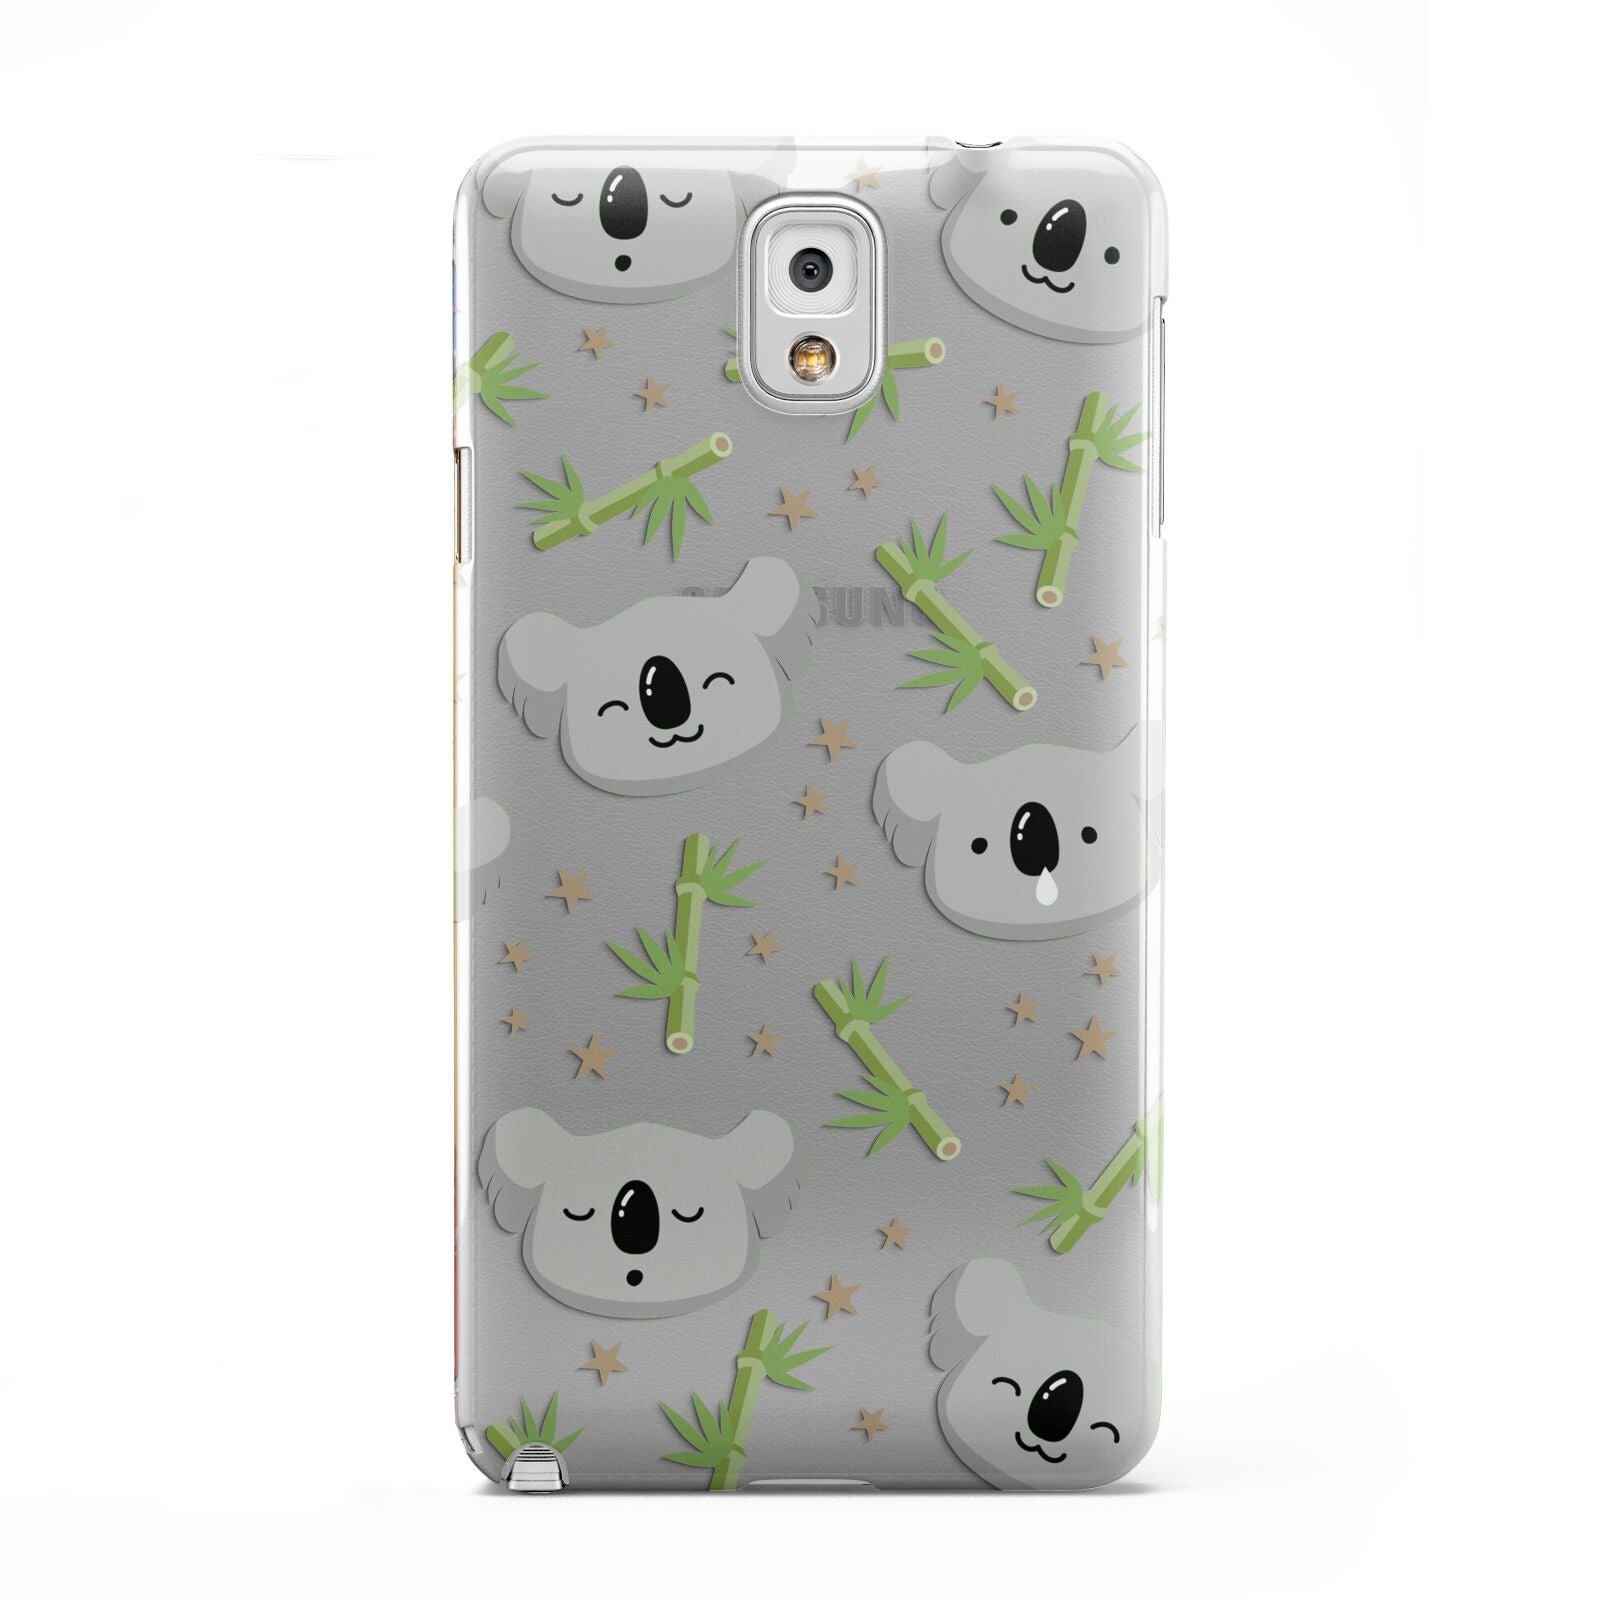 Koala Faces with Transparent Background Samsung Galaxy Note 3 Case